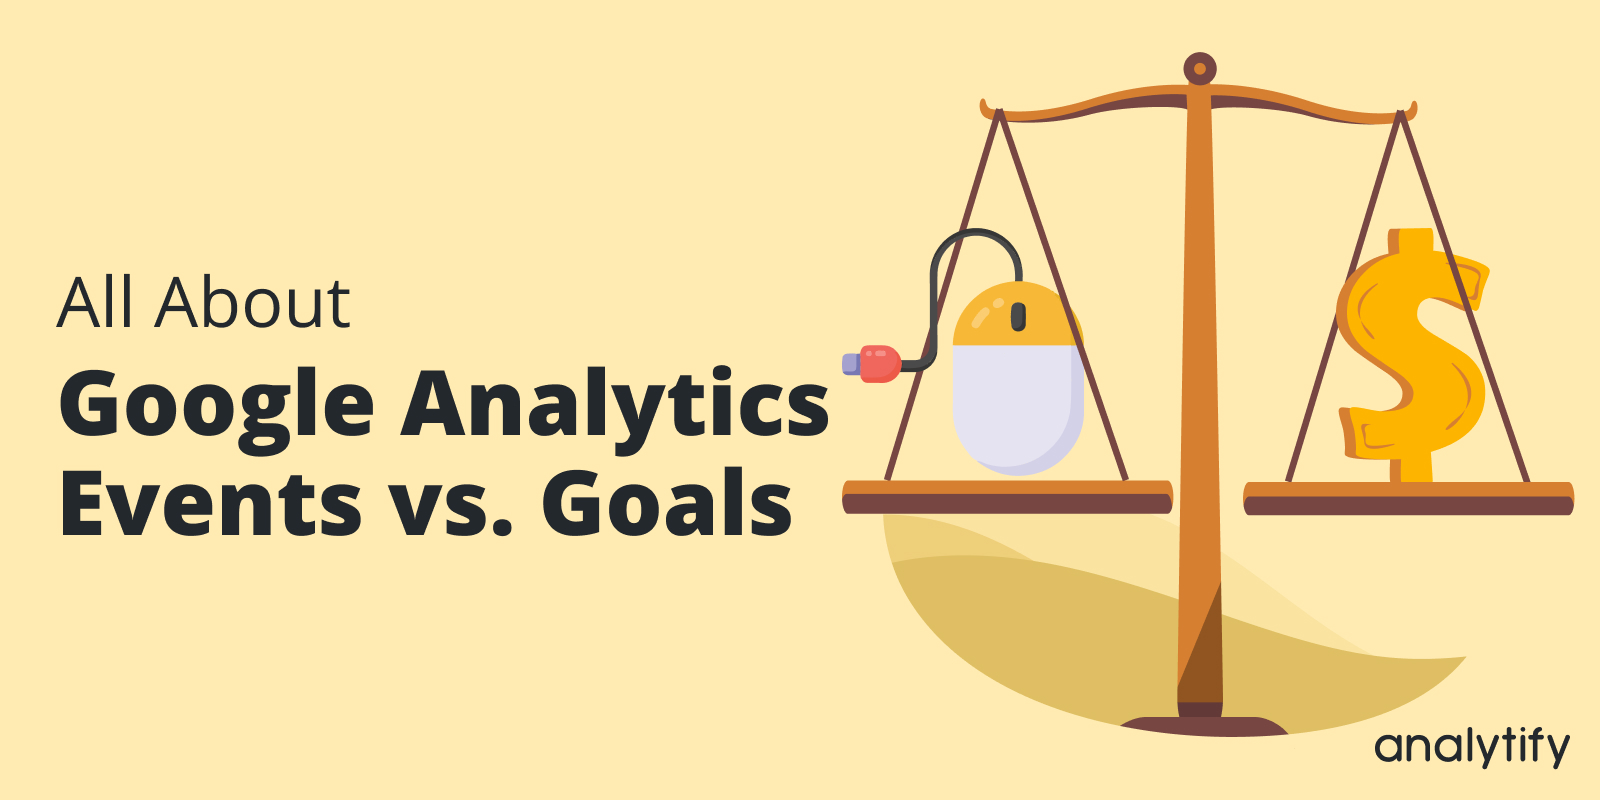 All About Google Analytics Events vs Goals